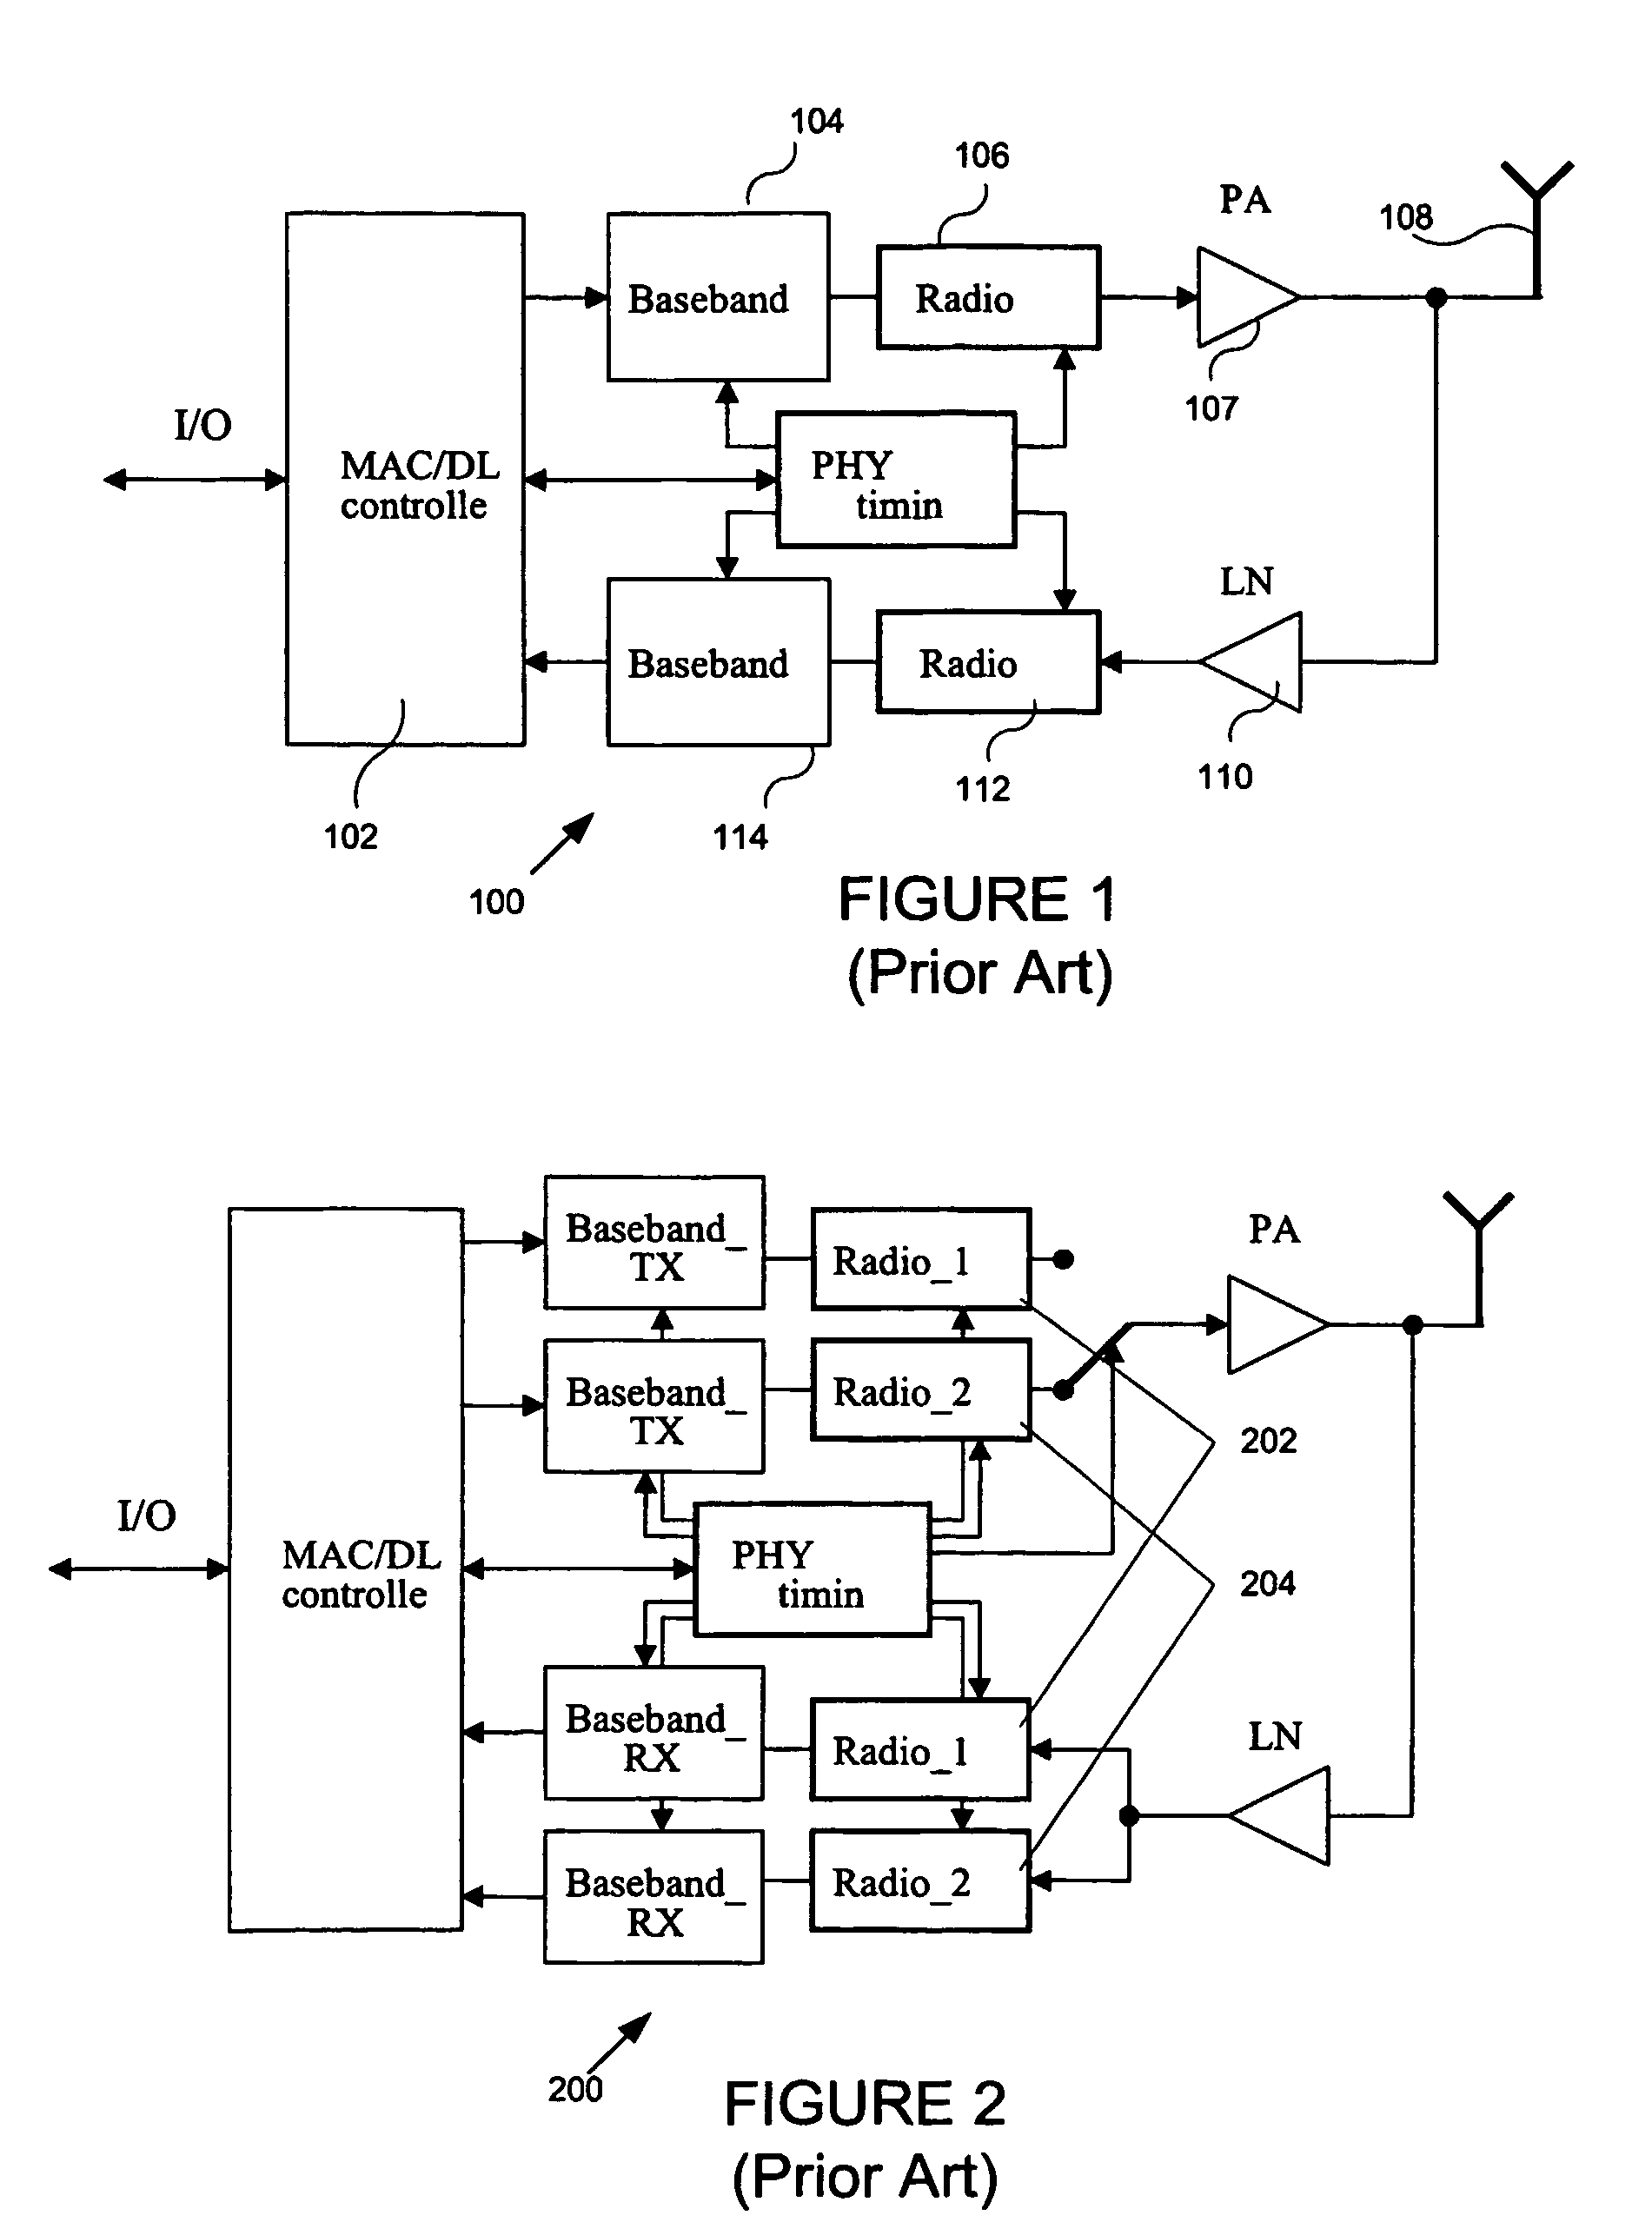 Method and system for asymmetric dual-mode radio communications